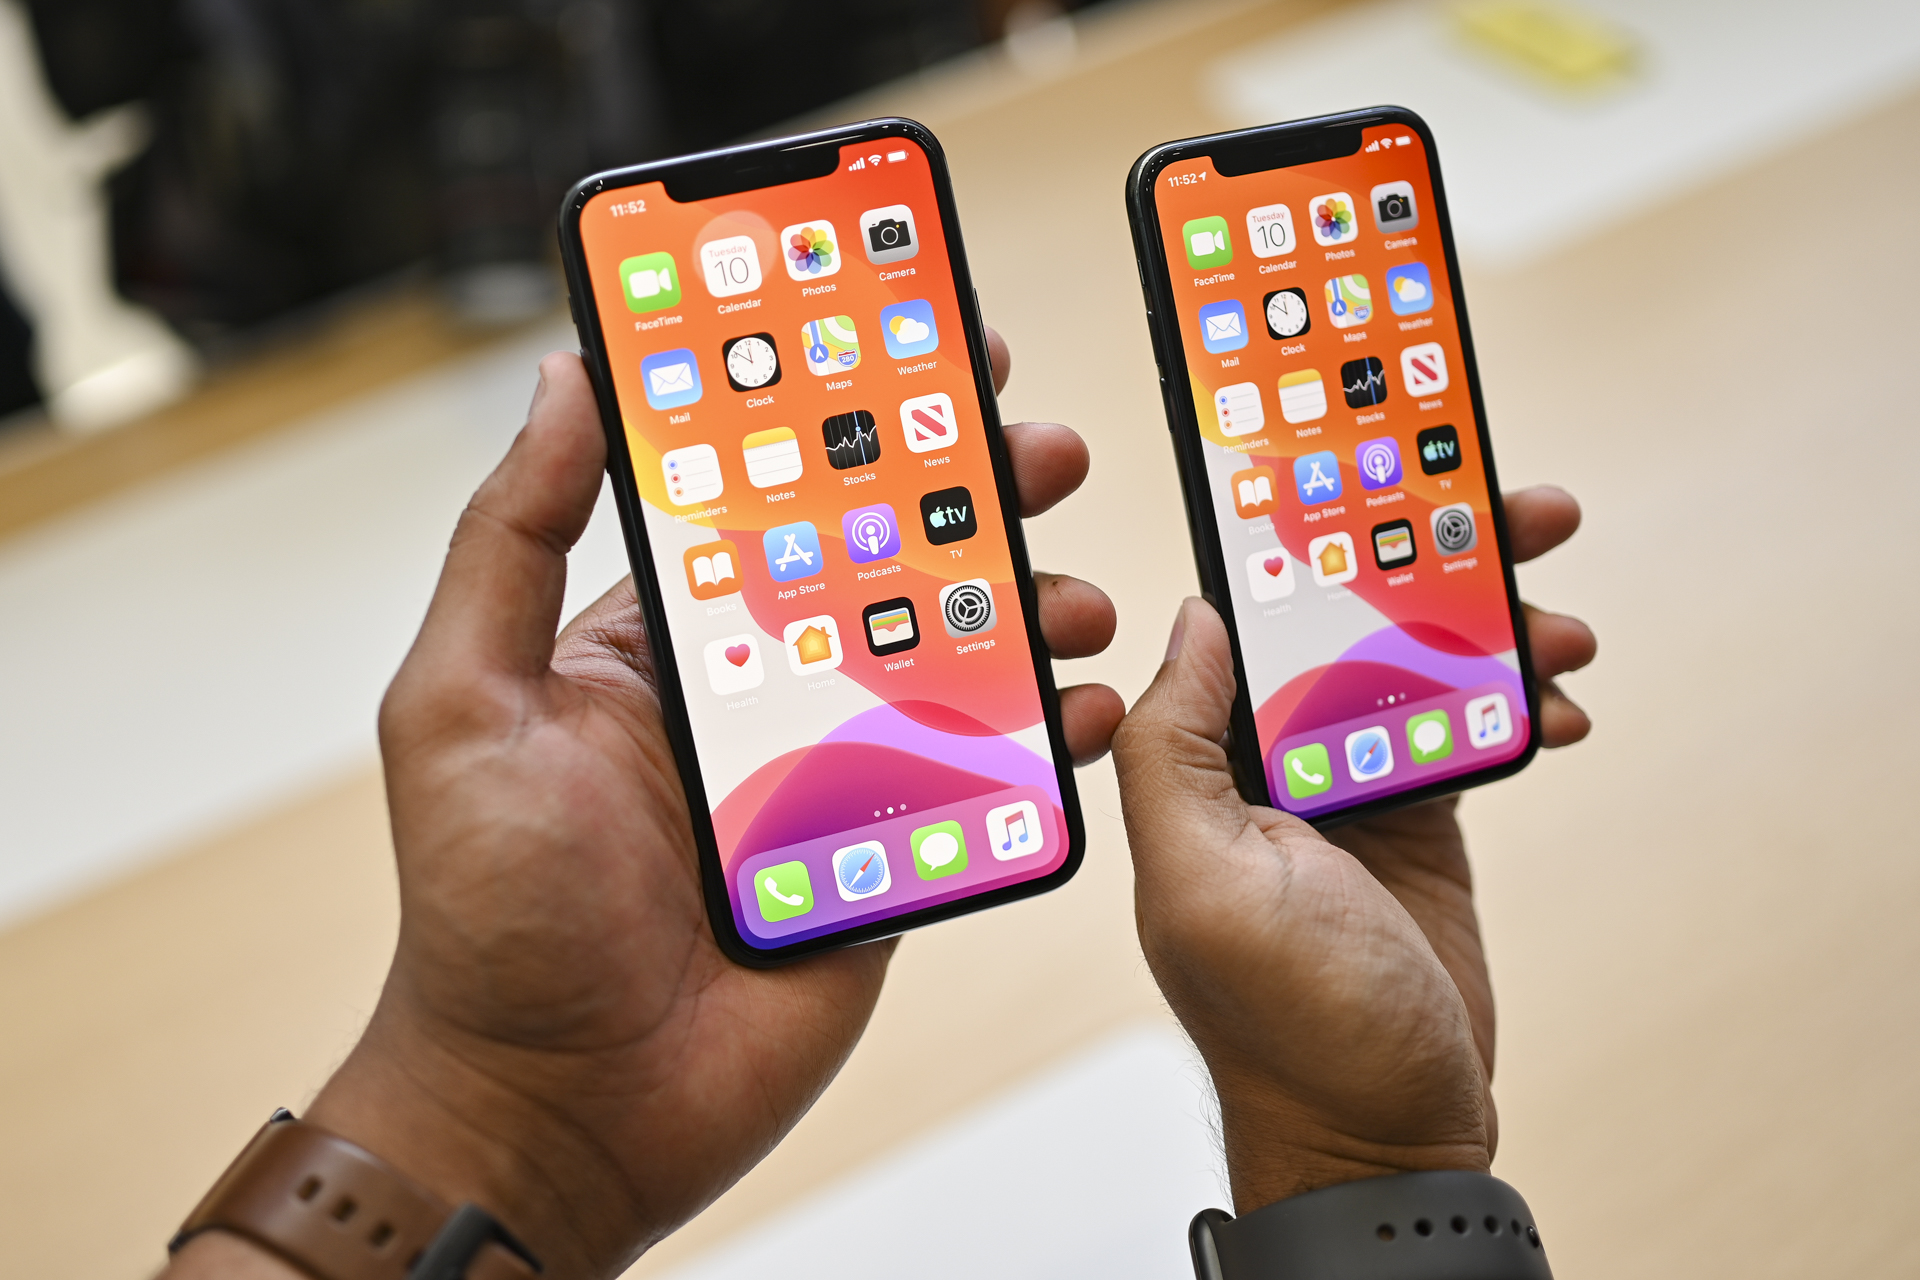 iPhone 11, iPhone 11 Pro, and iPhone 11 Pro Max: What Apple